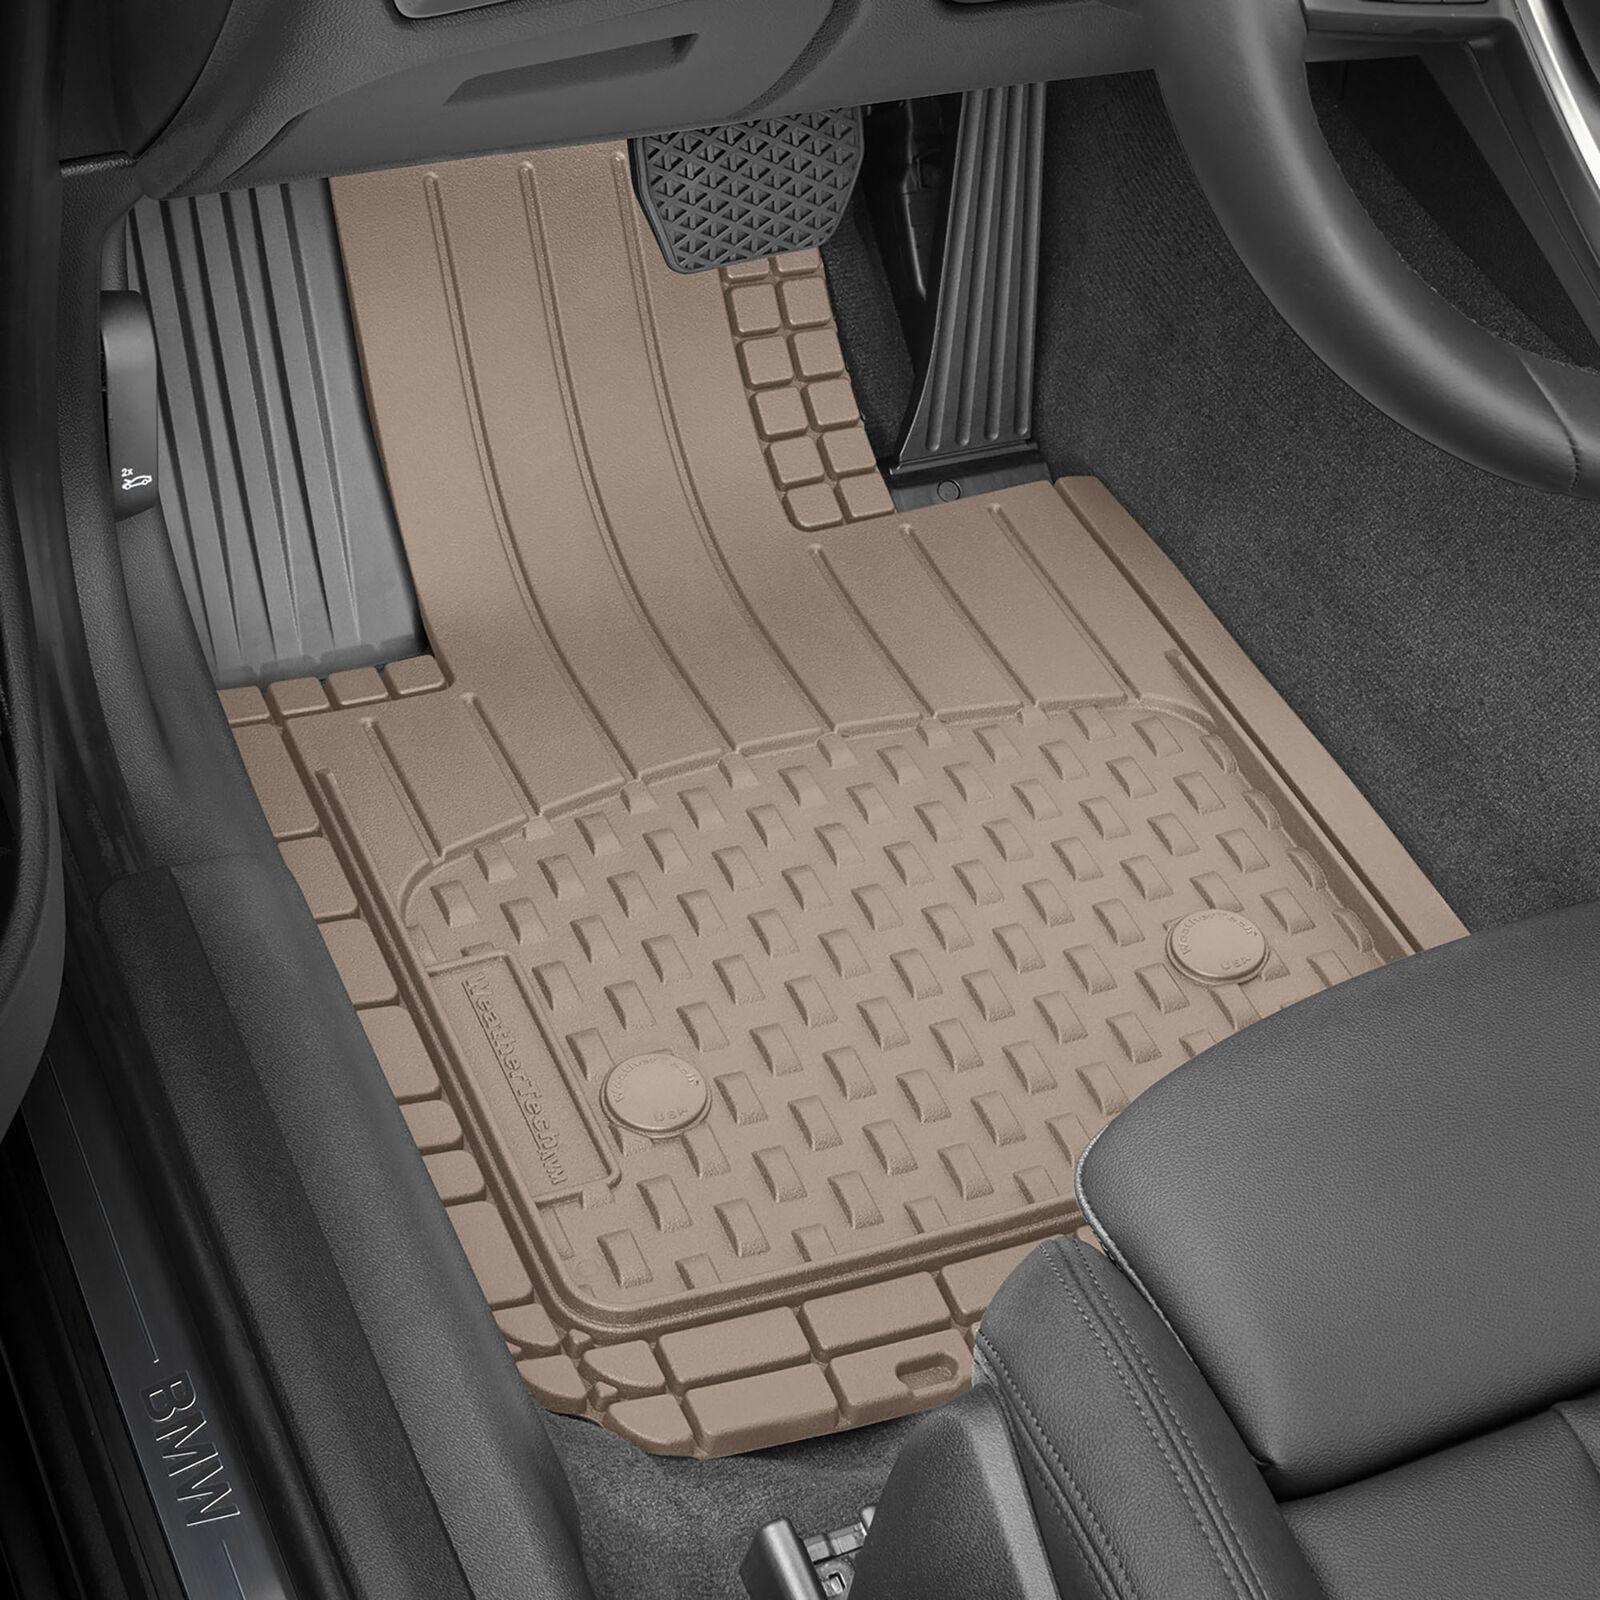 WeatherTech Trim-to-Fit Car Floor Mat Set for $27.99 Shipped